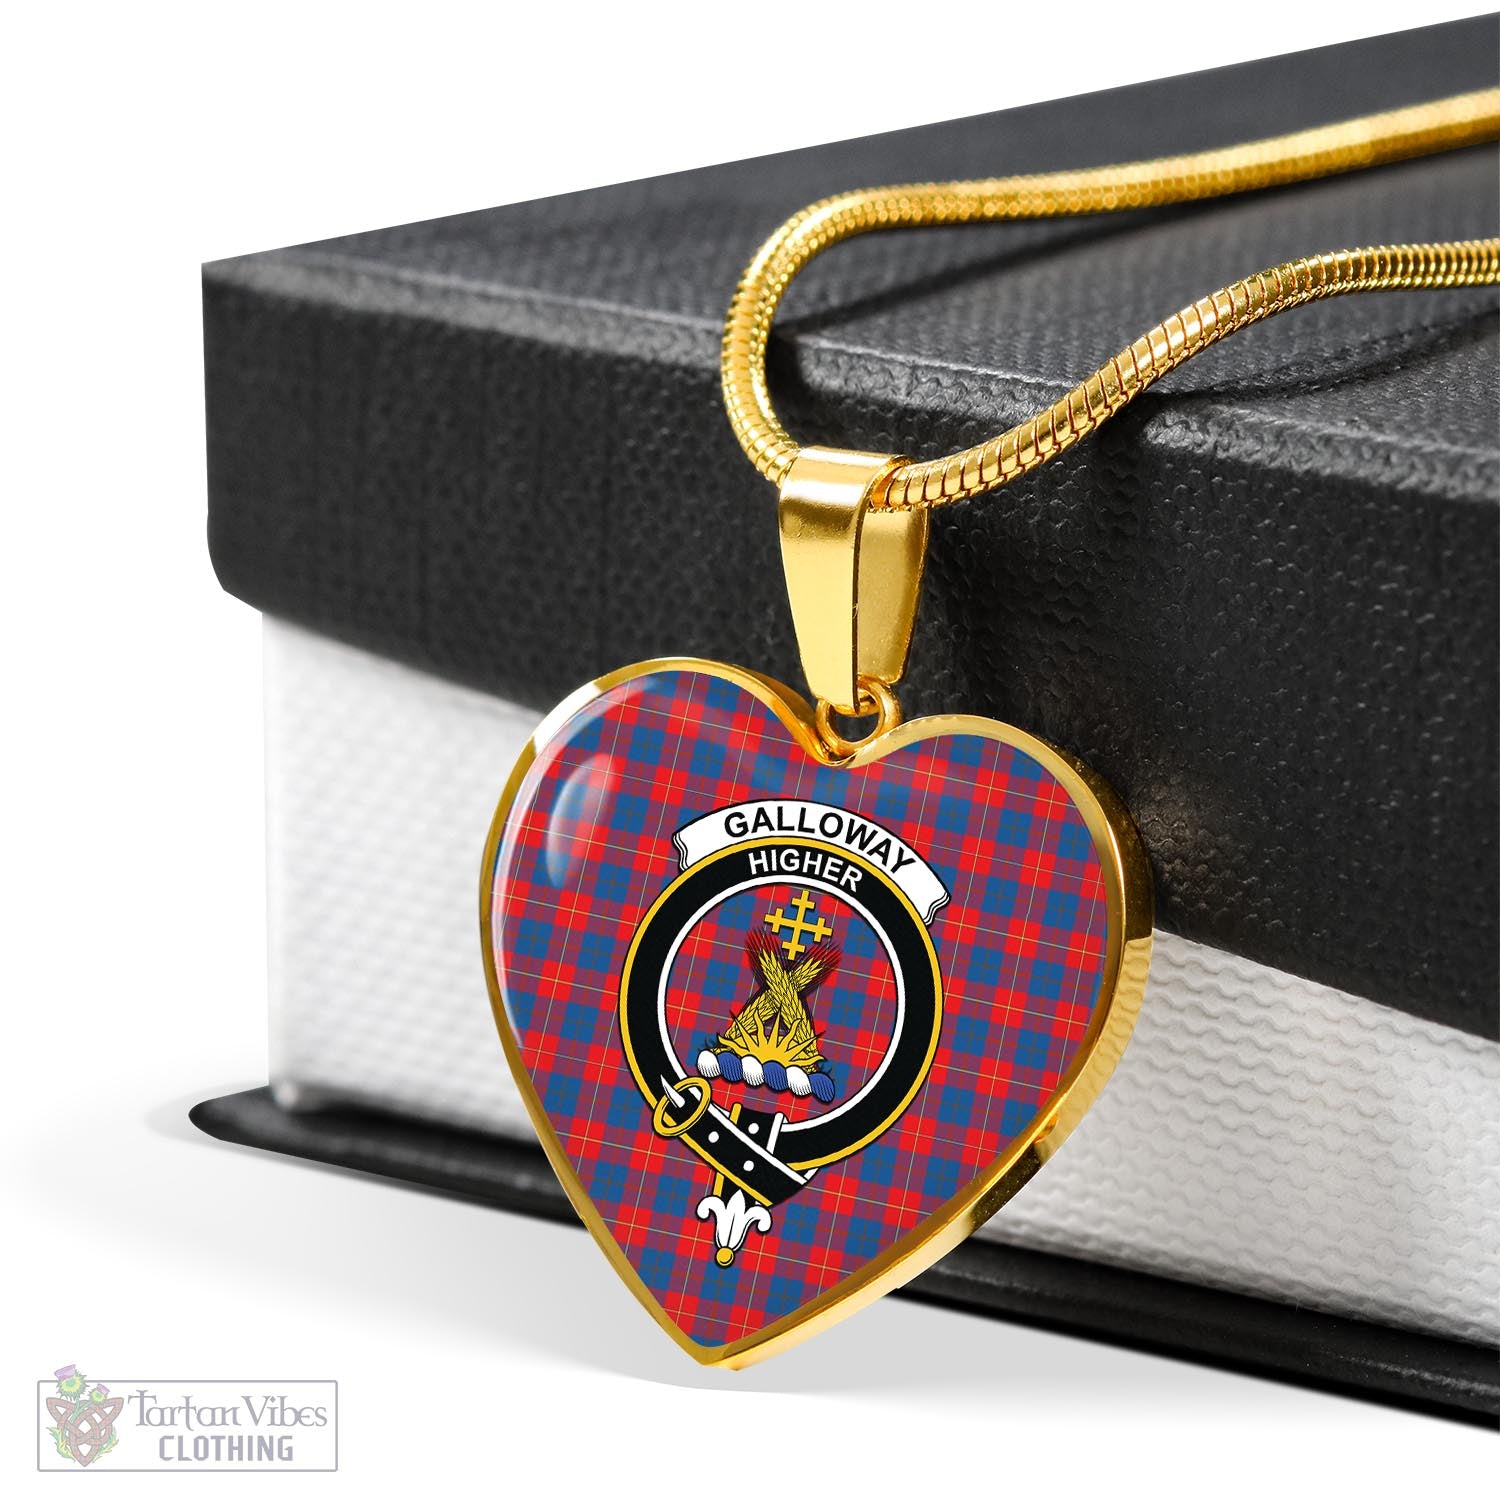 Tartan Vibes Clothing Galloway Red Tartan Heart Necklace with Family Crest